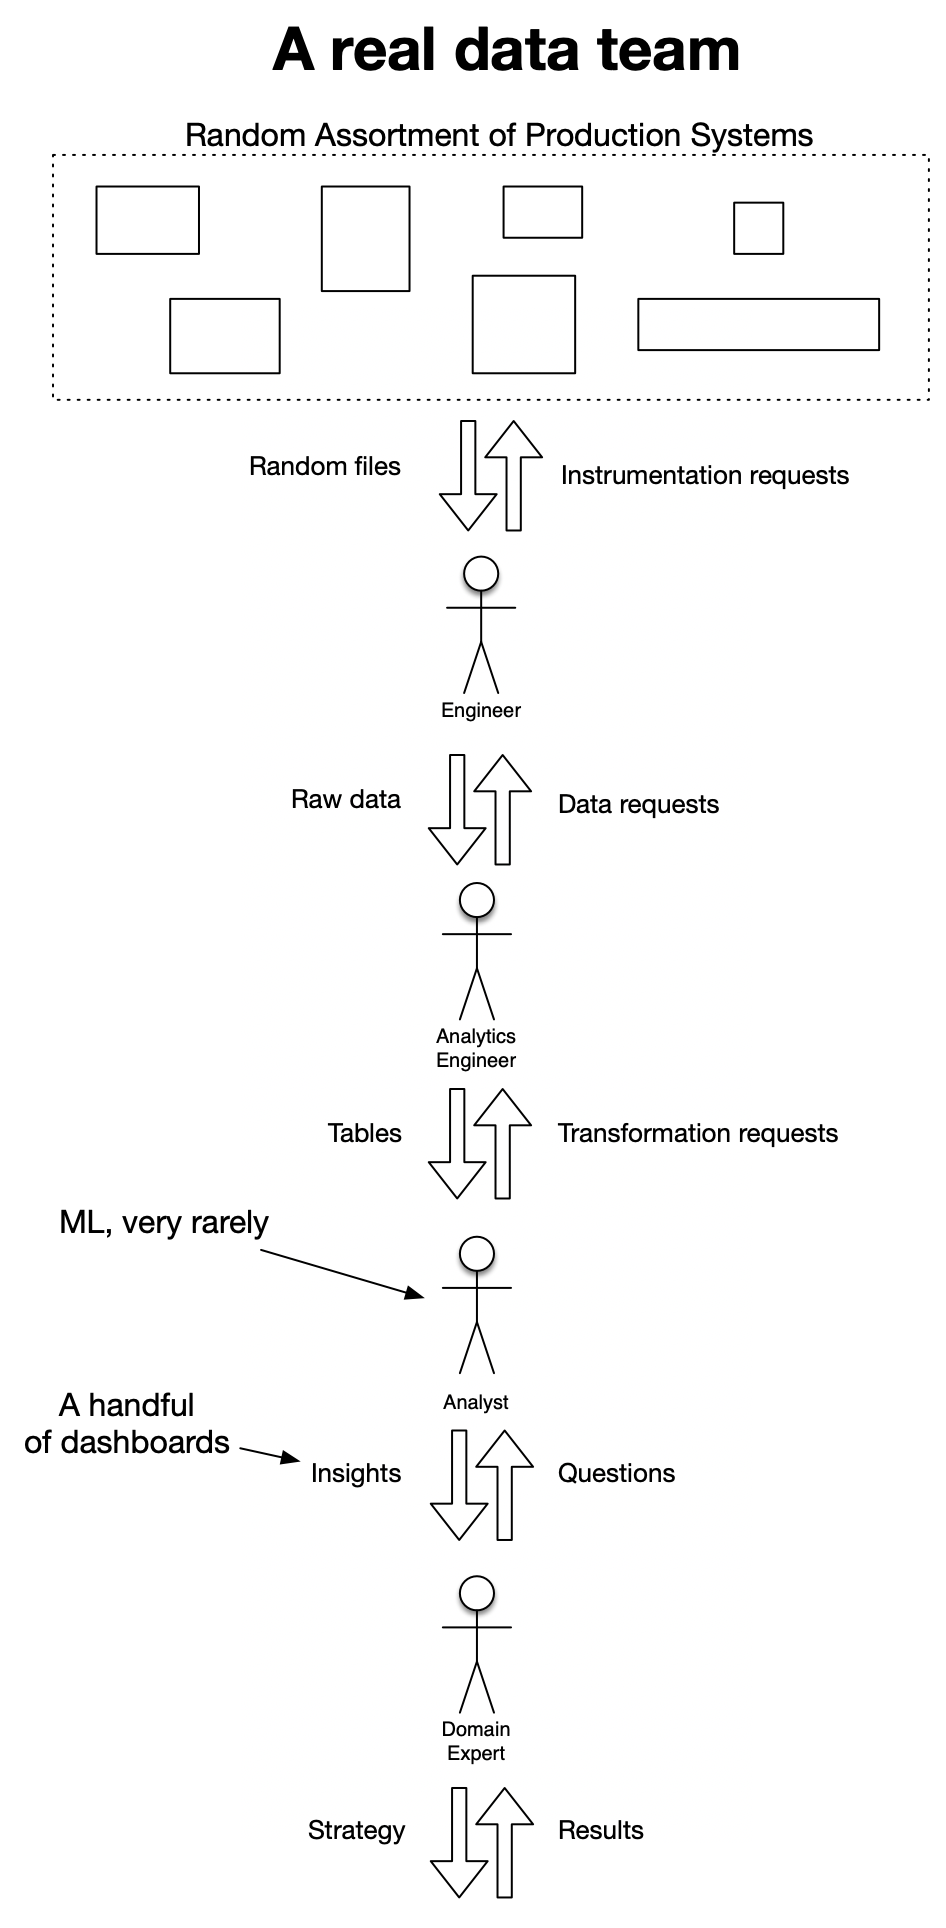 A diagram showing a progression from 'random production systems' sending 'random files' to an engineer, who sends 'raw data' to an analytics engineer, who sends 'tables' to an analyst, who sends 'insights' to a domain expert, who sends 'strategy' to the company. The company sends back 'results' to the domain expert, who sends back questions to the analyst, who sends back transformation requests to the analytics engineer, who sends back data requests to the engineer, who sends instrumentation back to the production systems